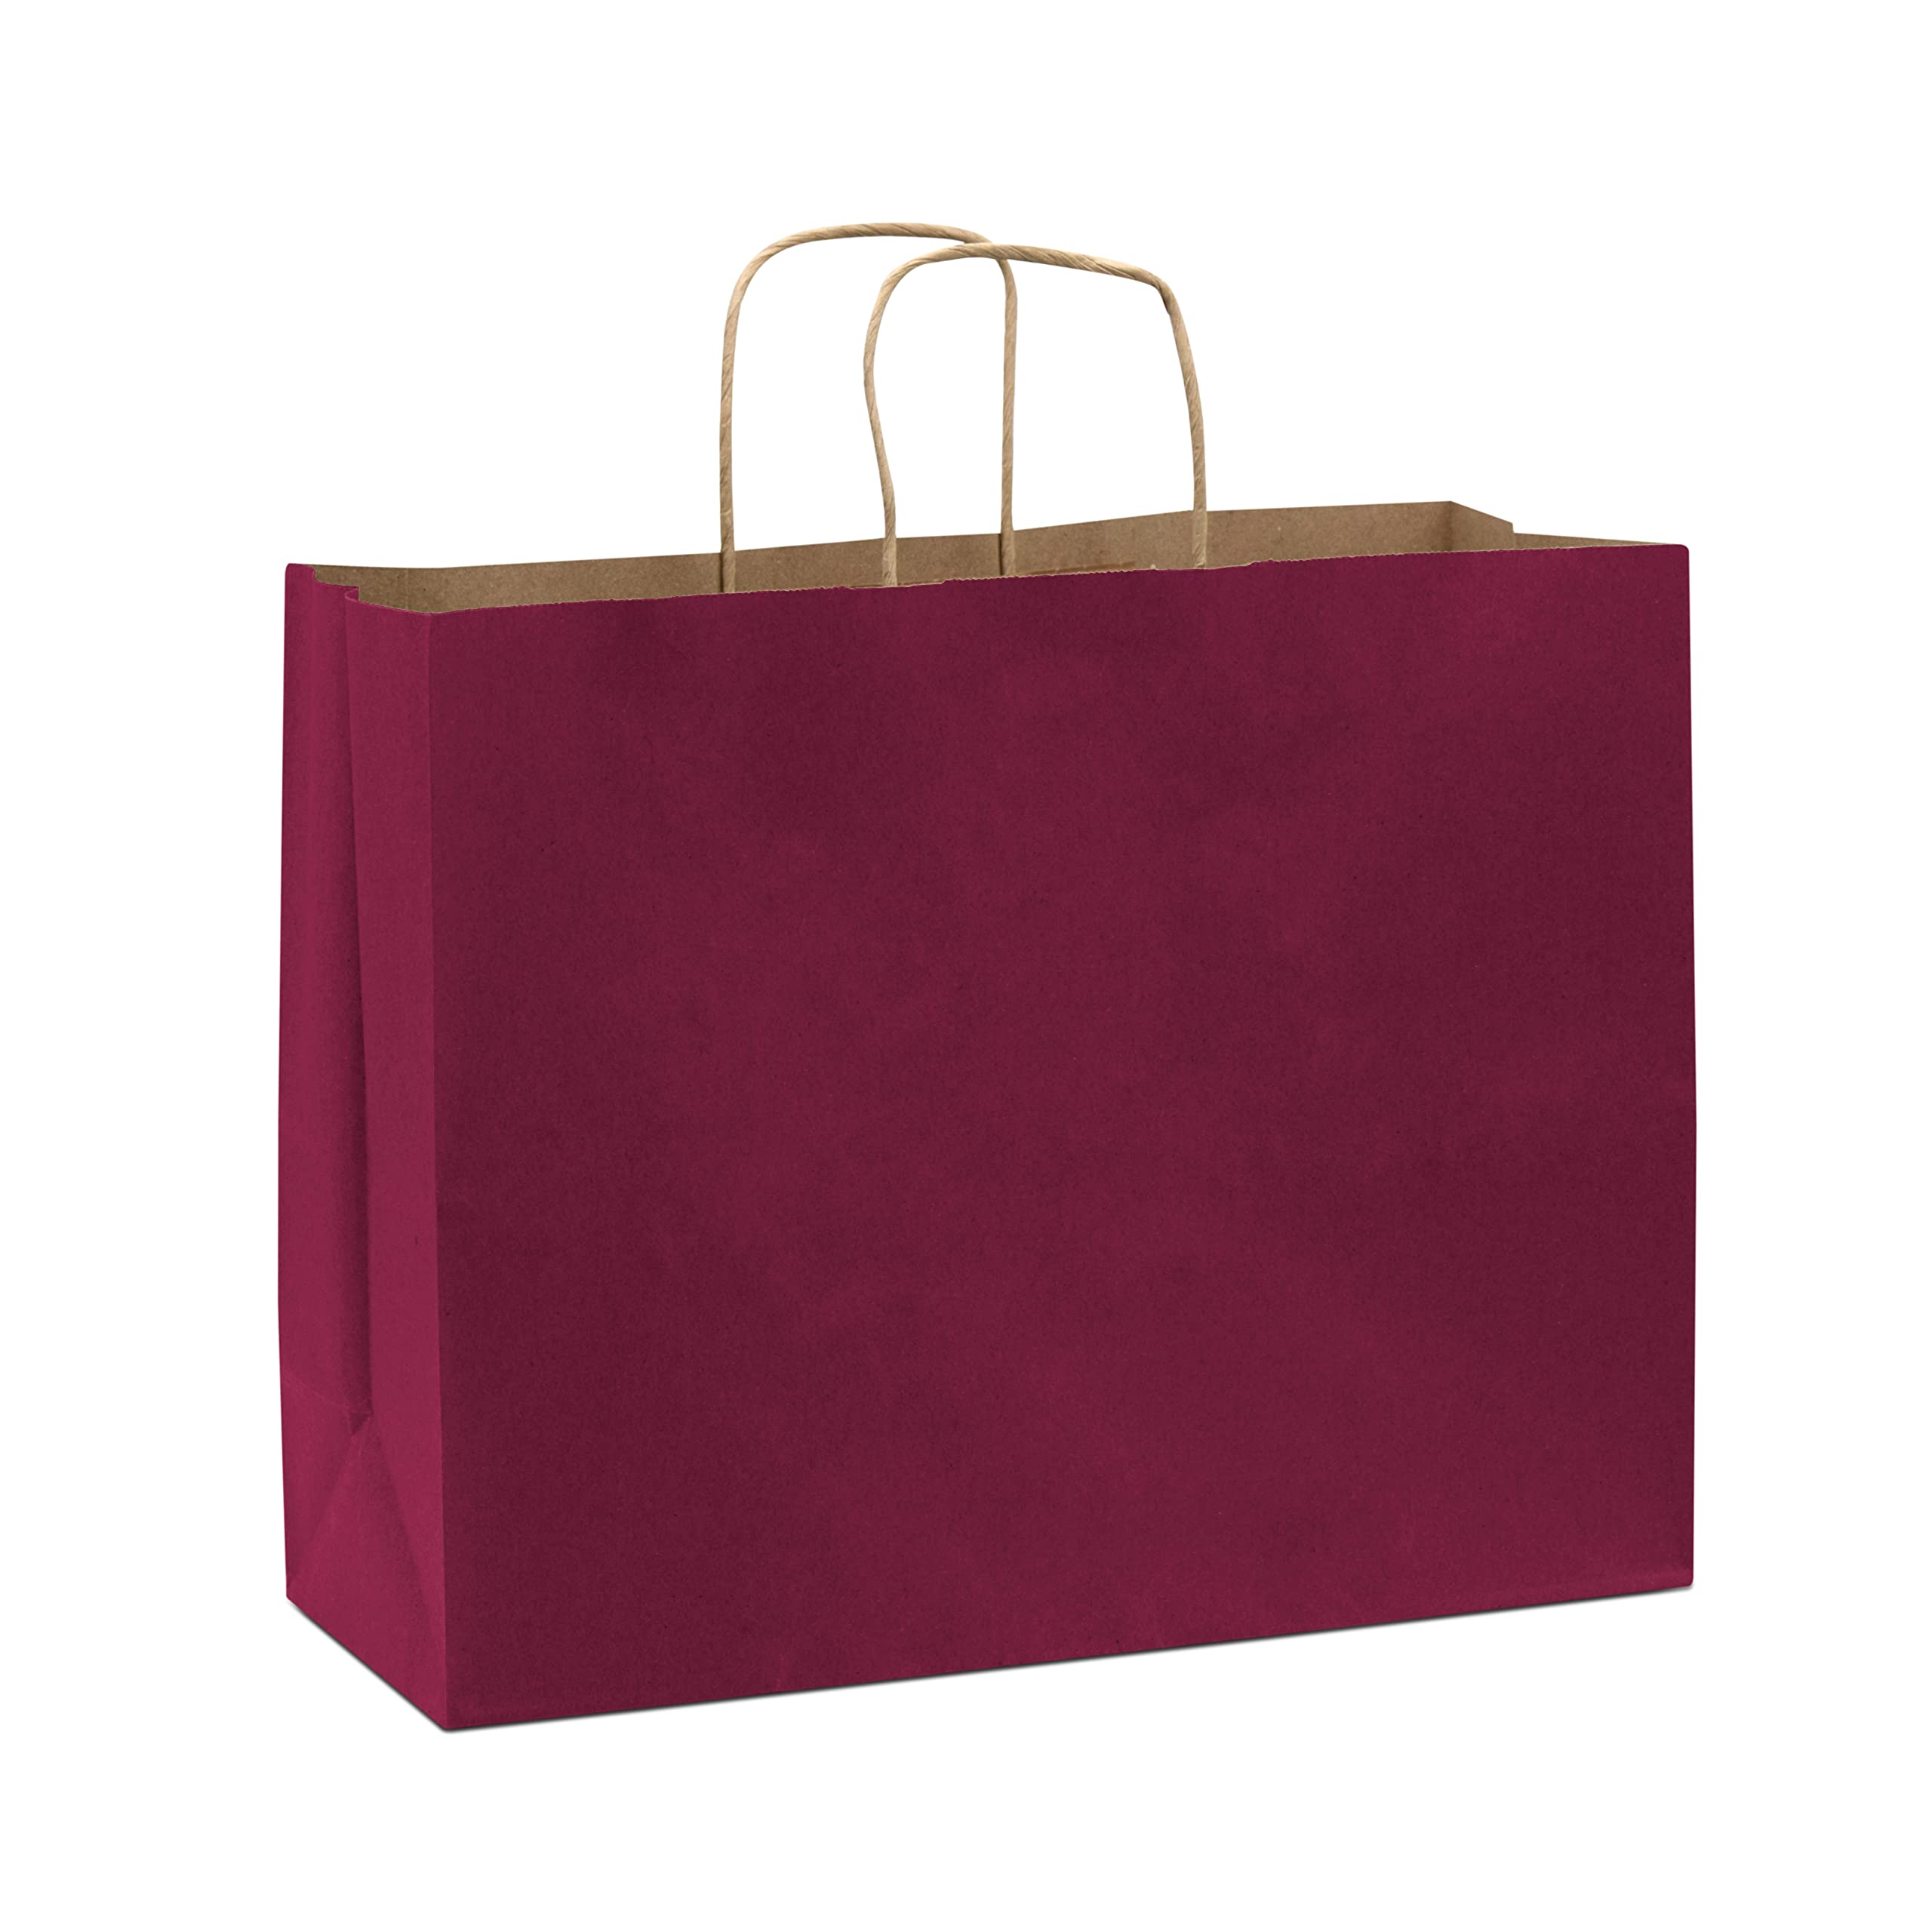 Pink Gift Bags with Handles - 16x6x12 Inch 100 Pack Large Fuchsia Kraft Paper Shopping Bags with Handles for Small Business, Retail & Boutique Use, Merchandise, Birthday & Holiday Gift Wrap, in Bulk